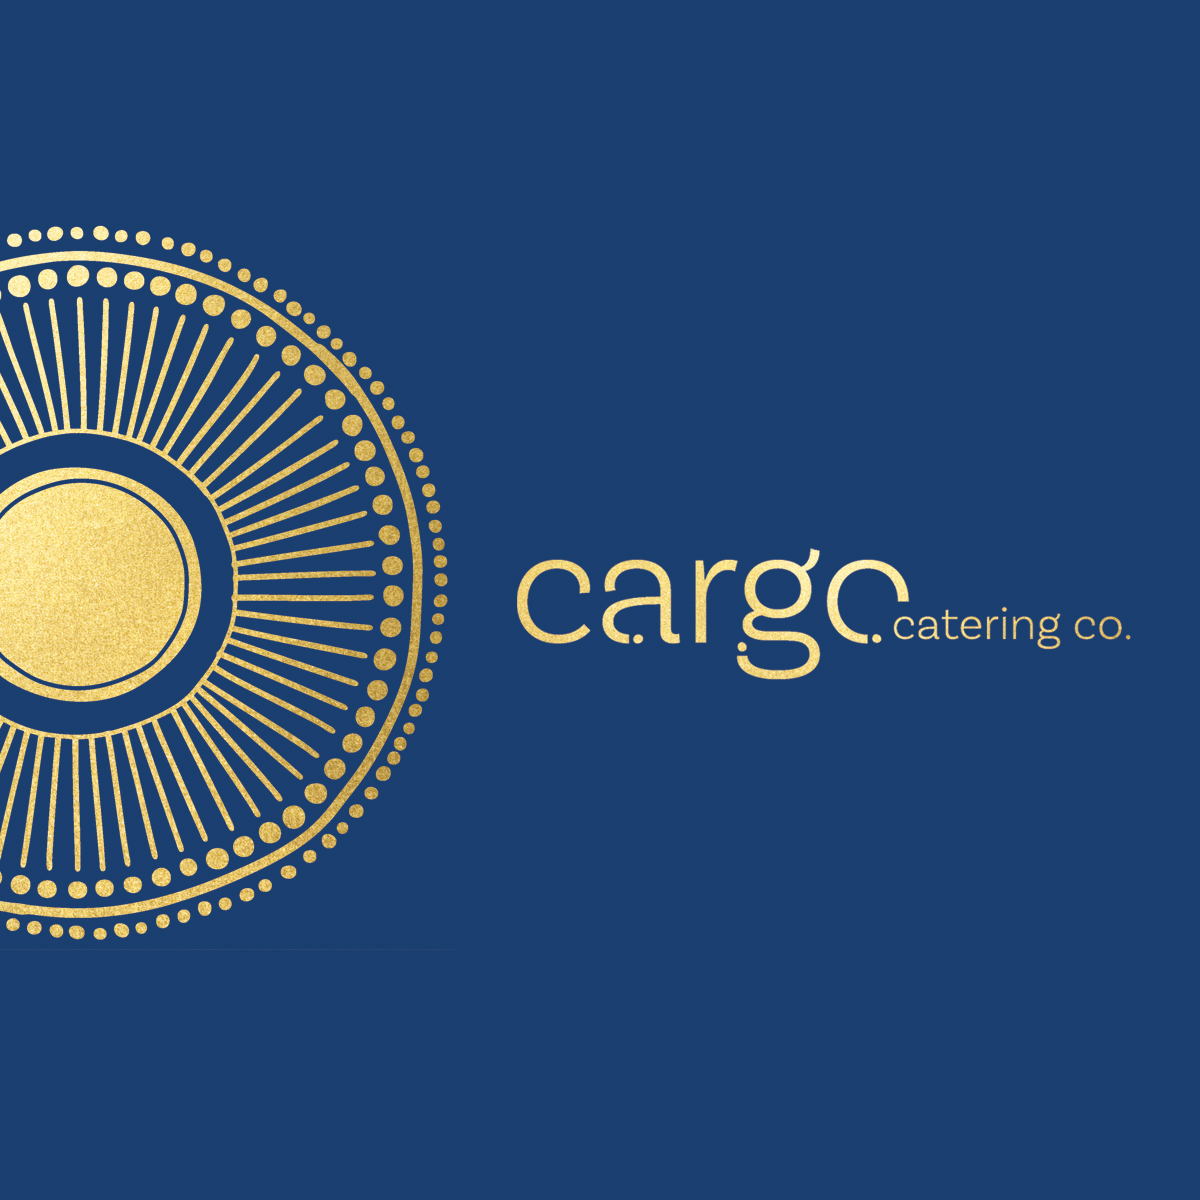 Cargo Caterging Co Logo 2